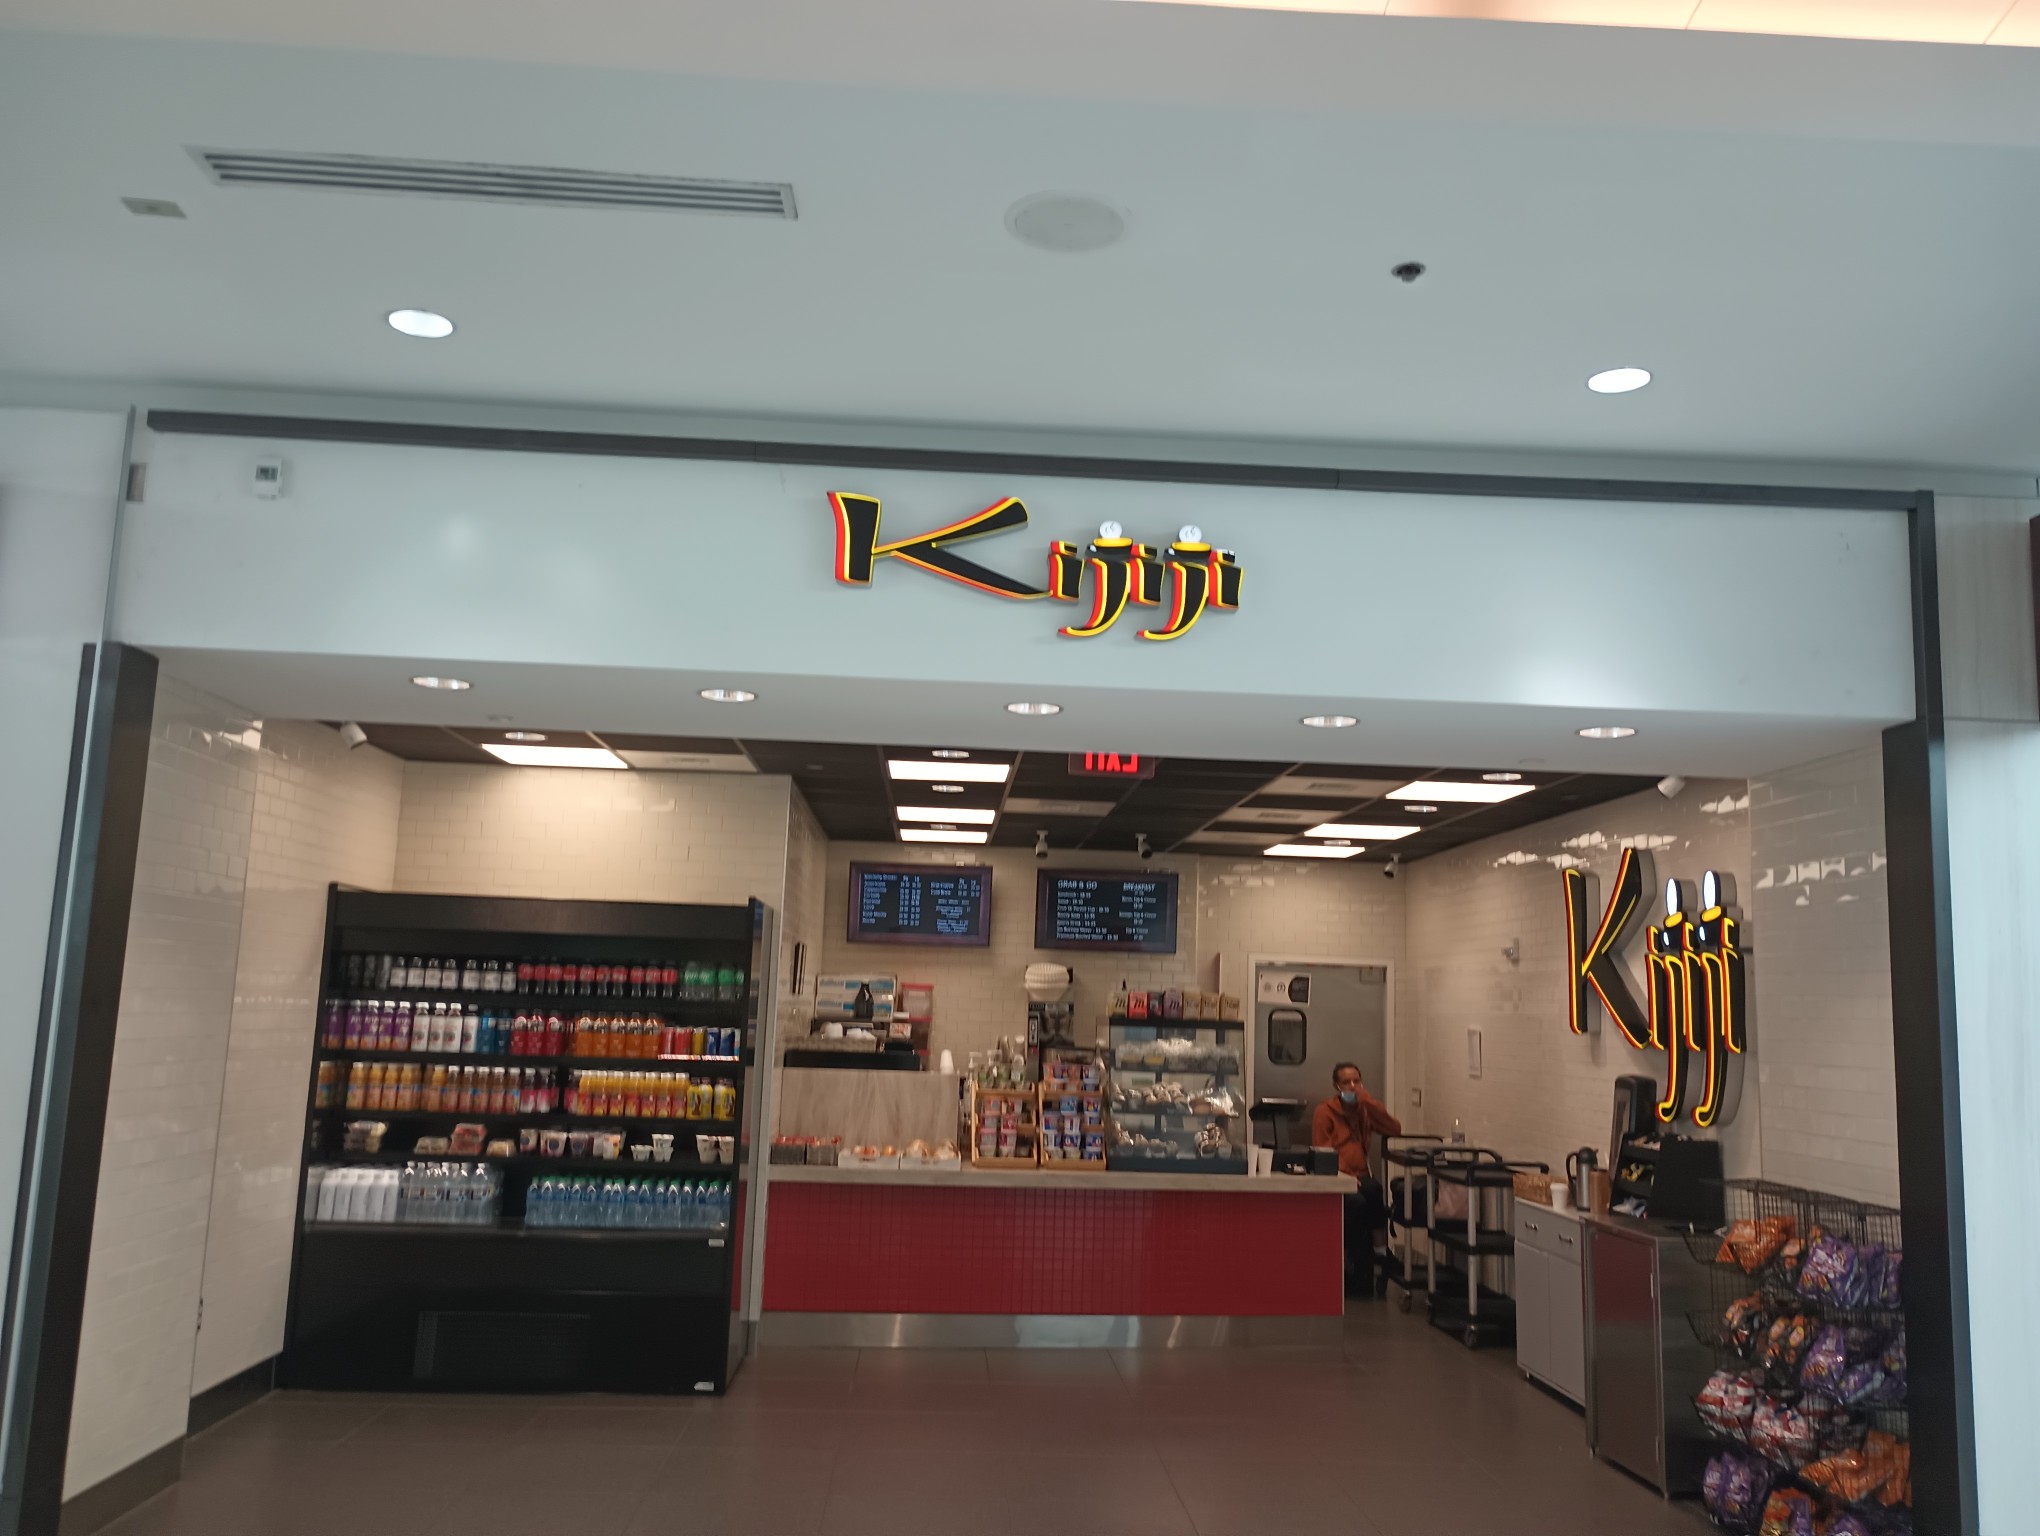 Second Kijiji Coffee Cafe Opens in BNA Airport